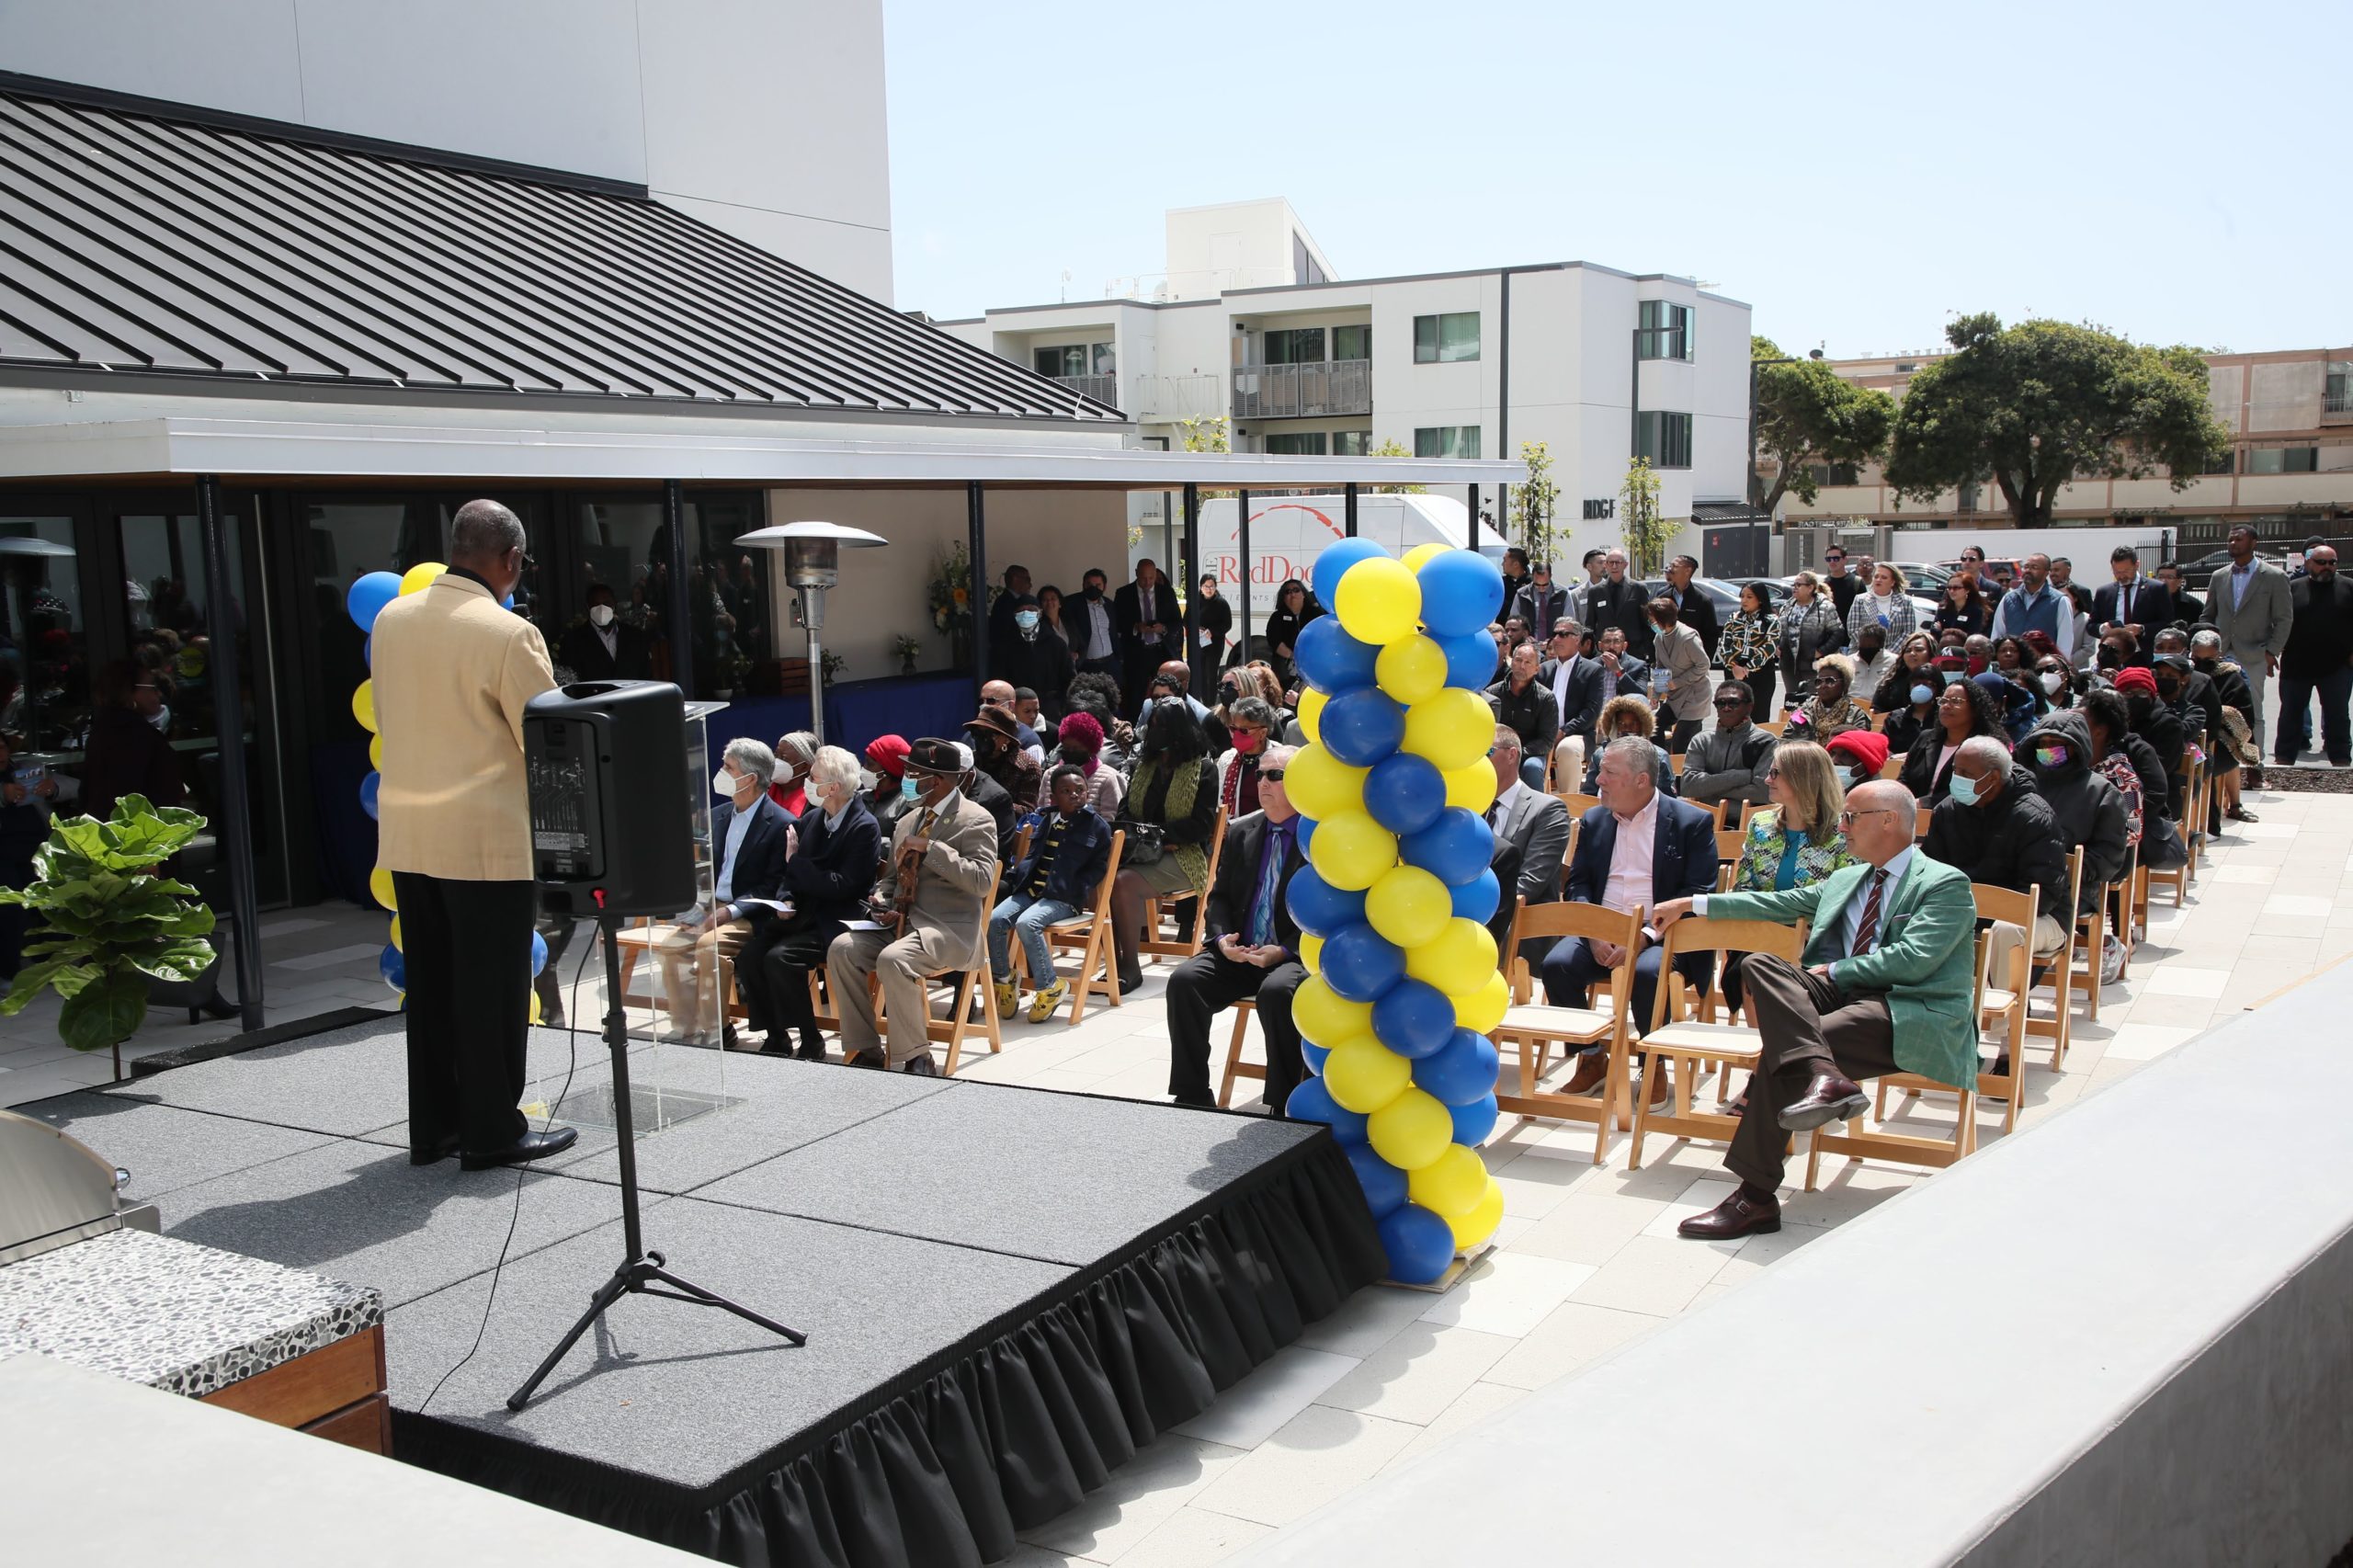 Grand Opening Event in front of newly renovated community room and bbq patio area.